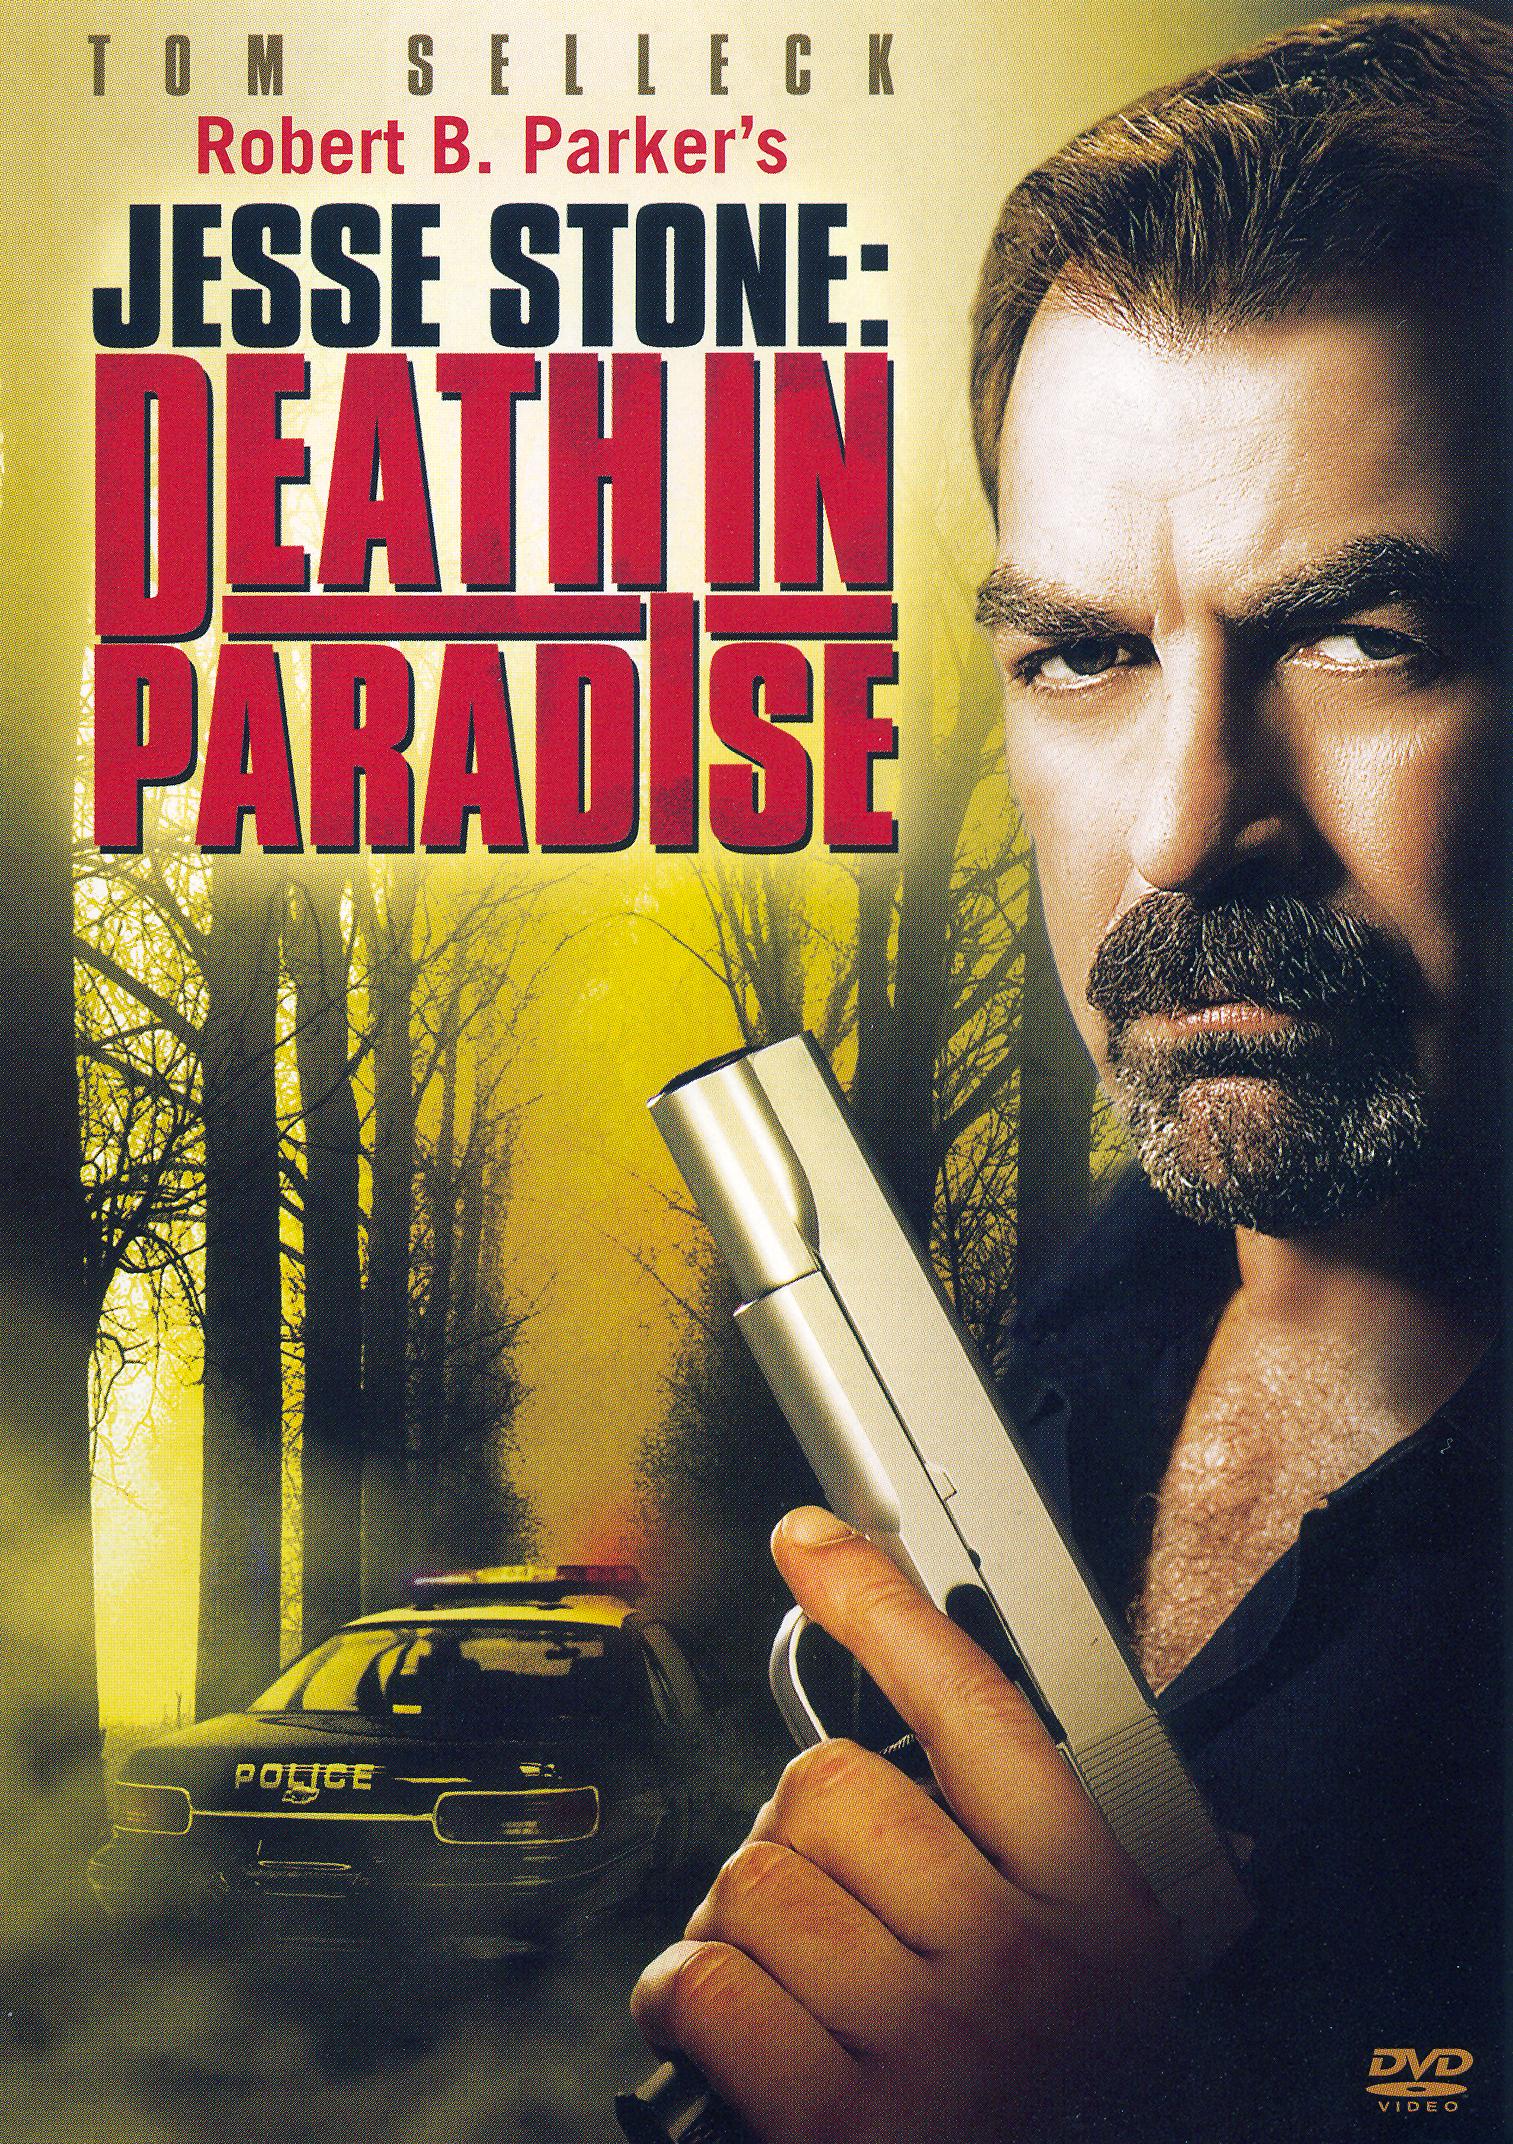 Jesse Stone: Death in Paradise cover art